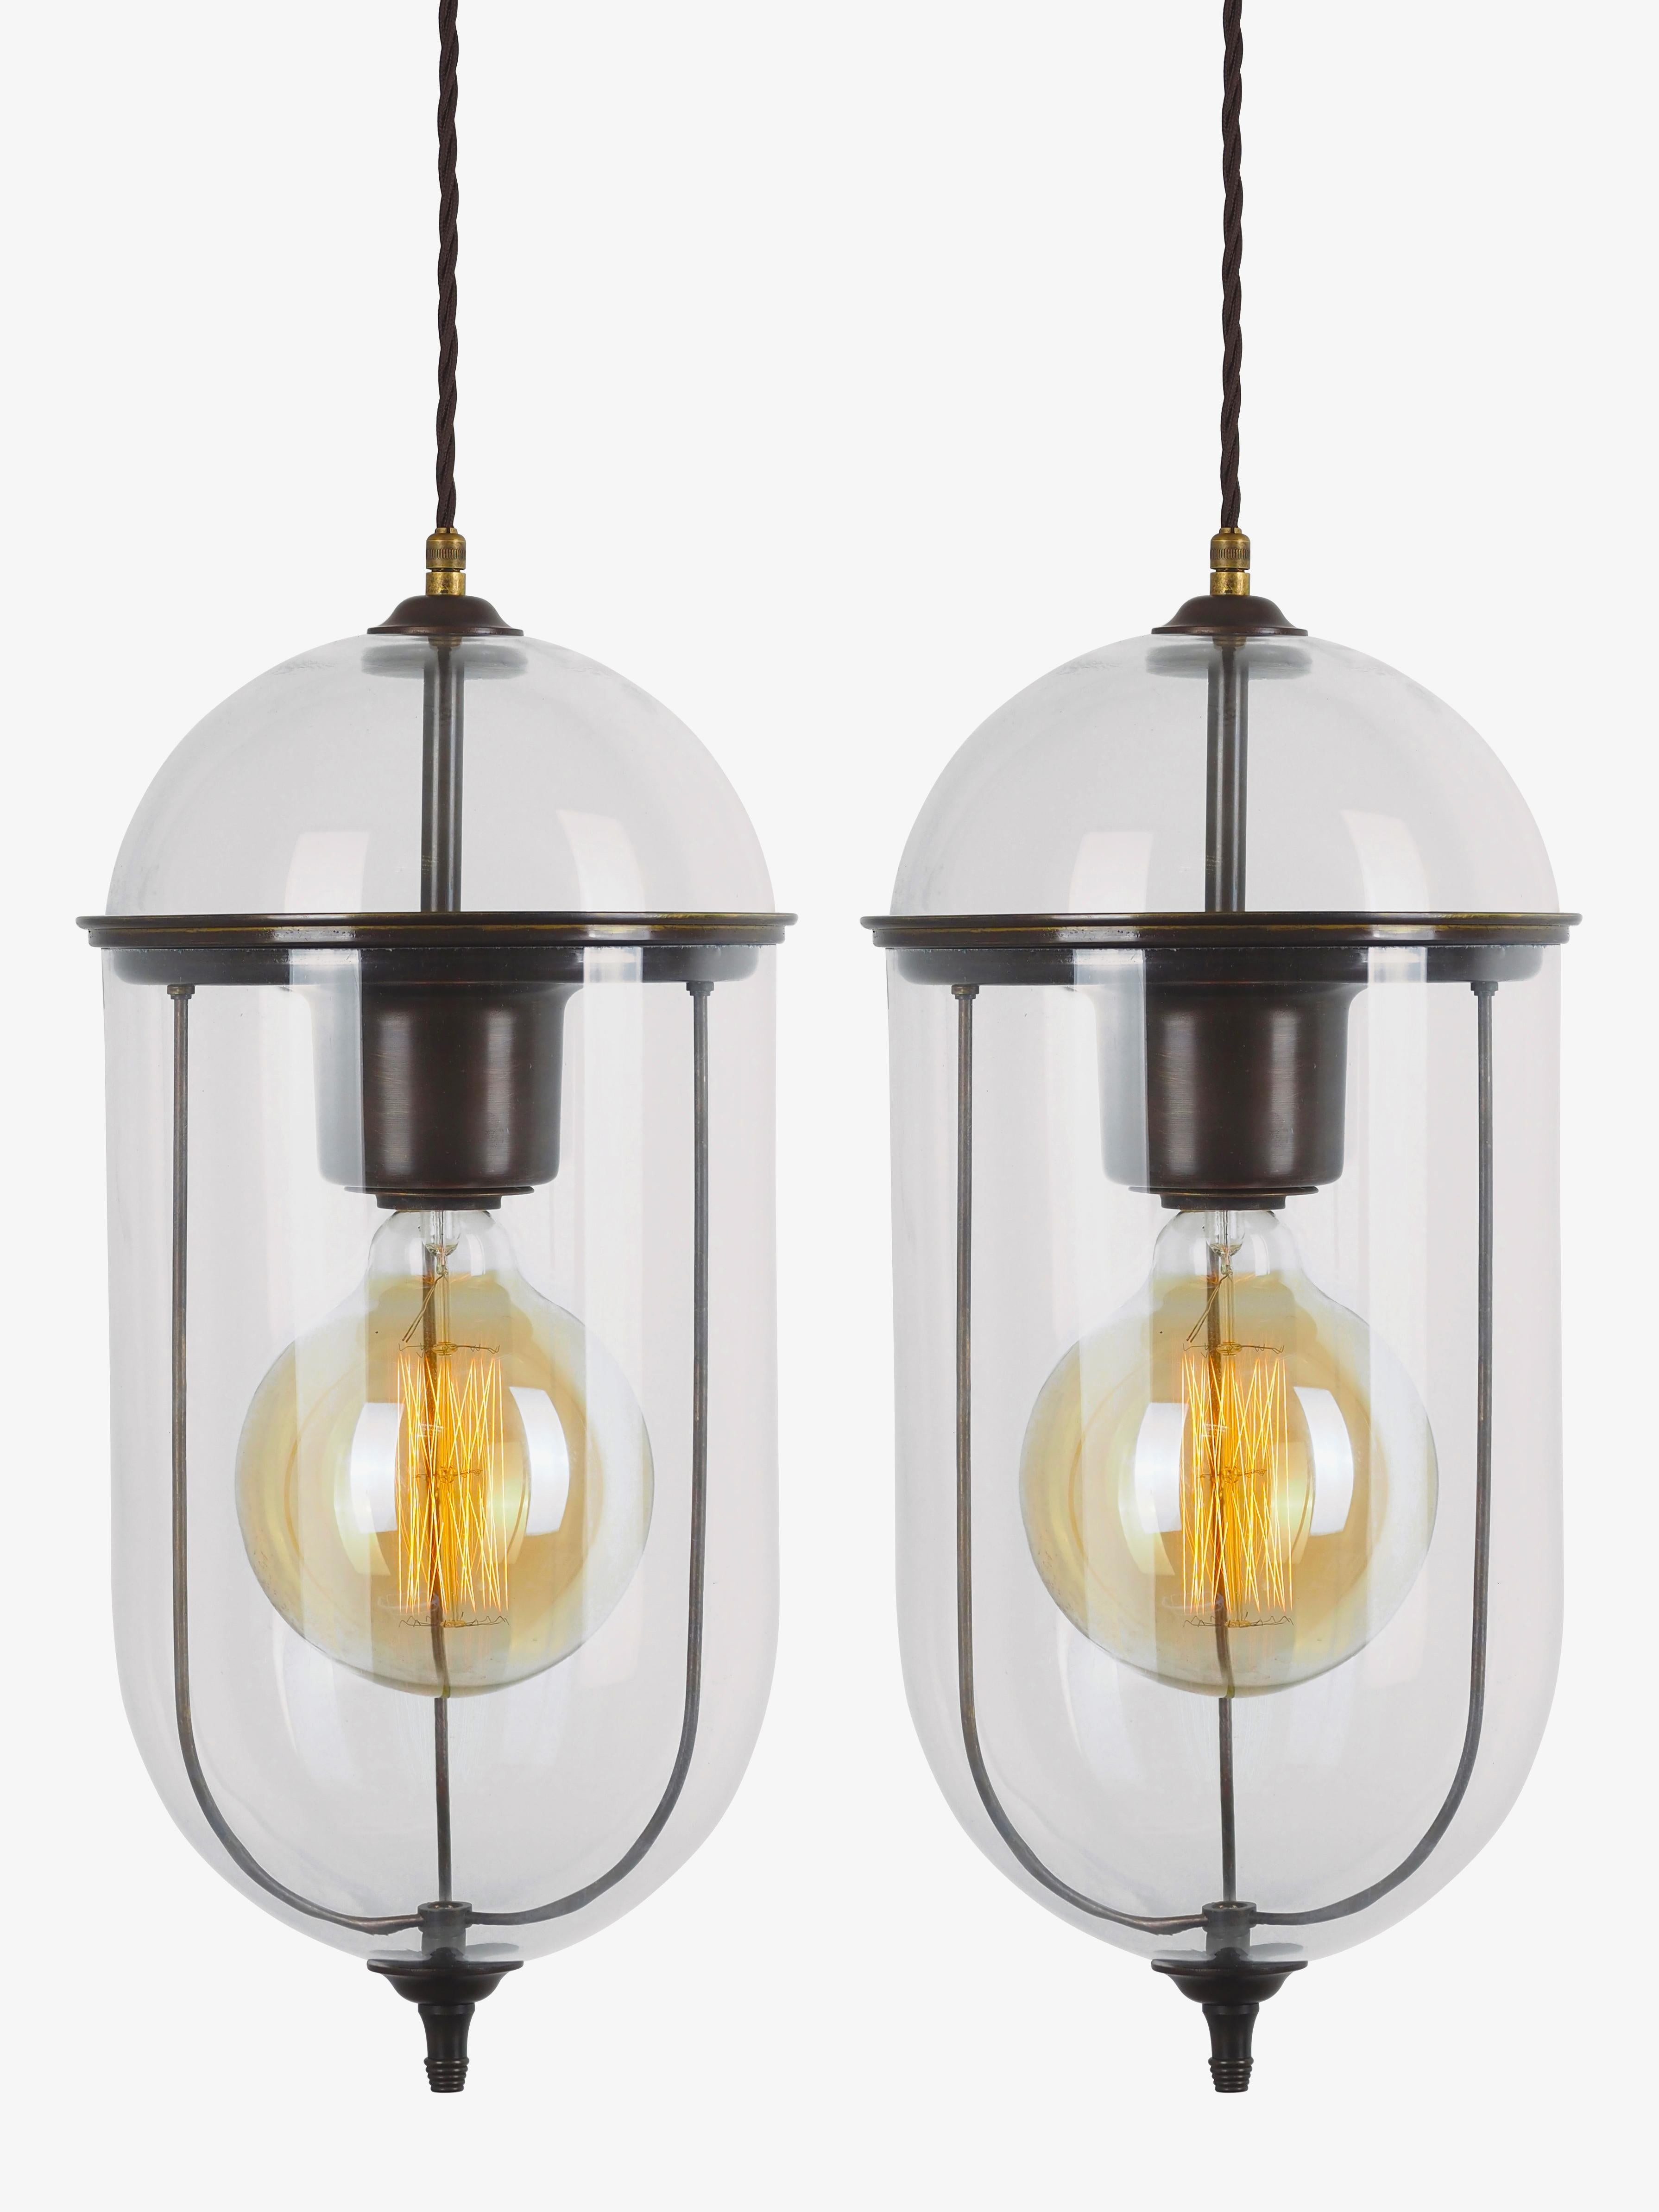 Elongated Glass and Bronze Pair Pendant Lights, Italy, Contemporary